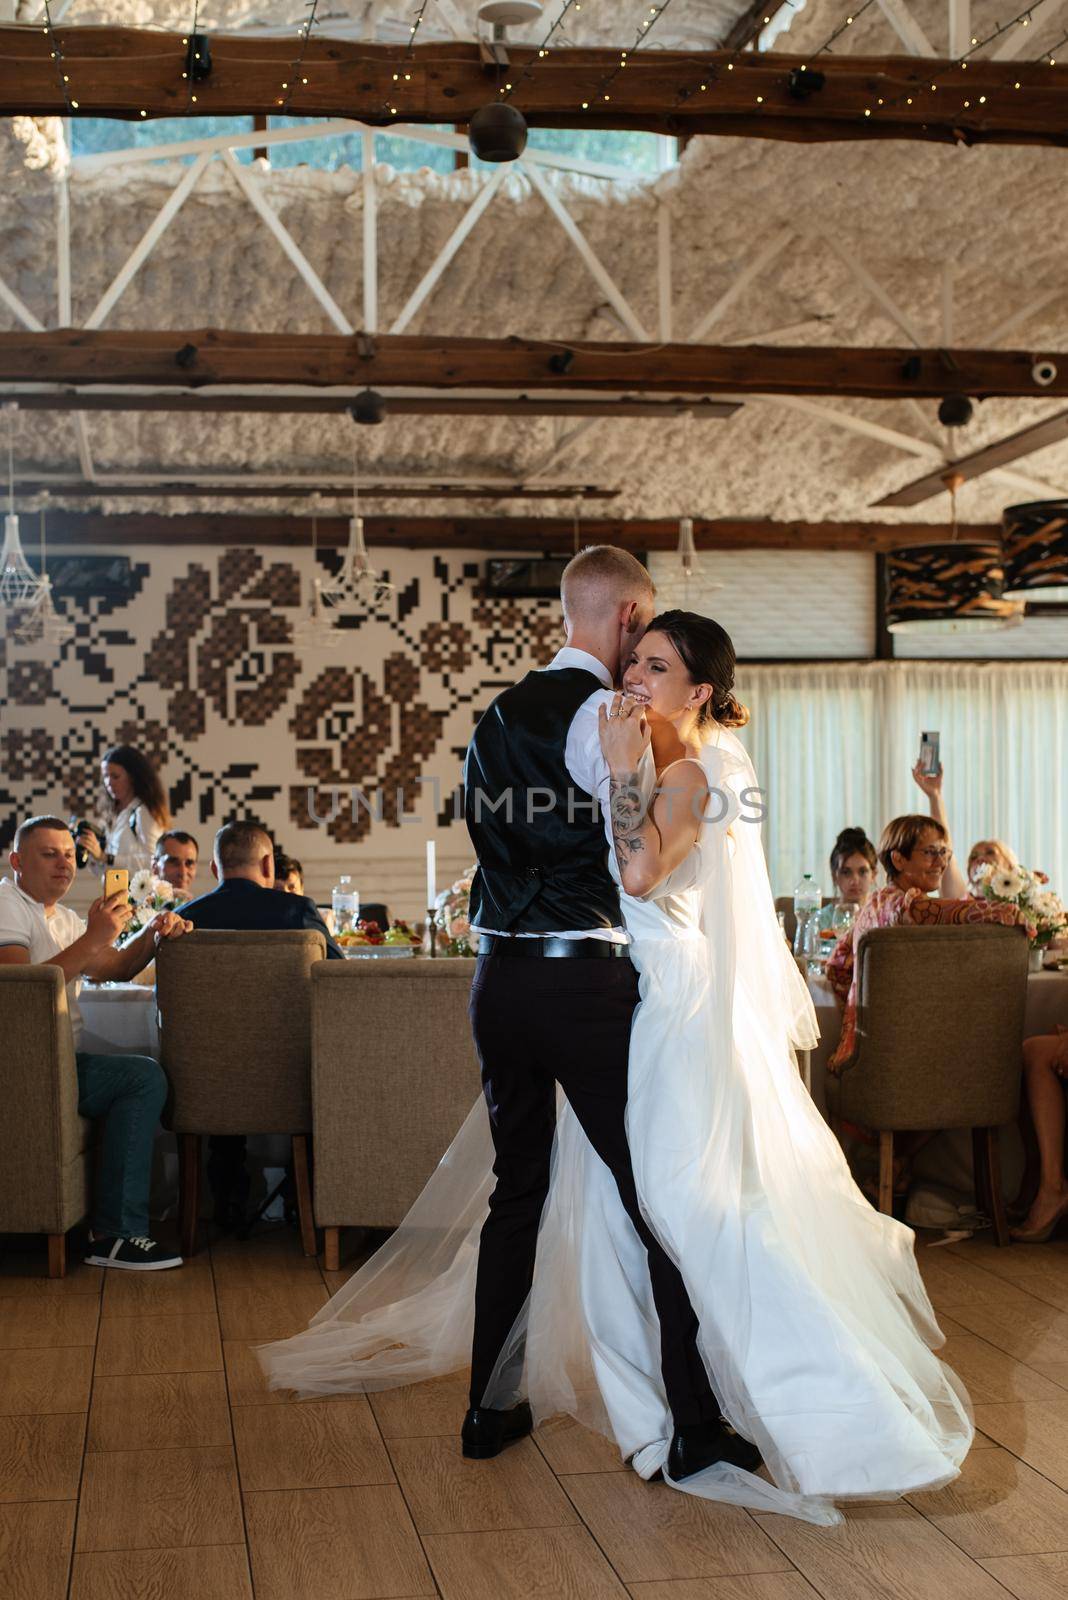 the first wedding dance of the bride and groom inside the restaurant hall in sunset light